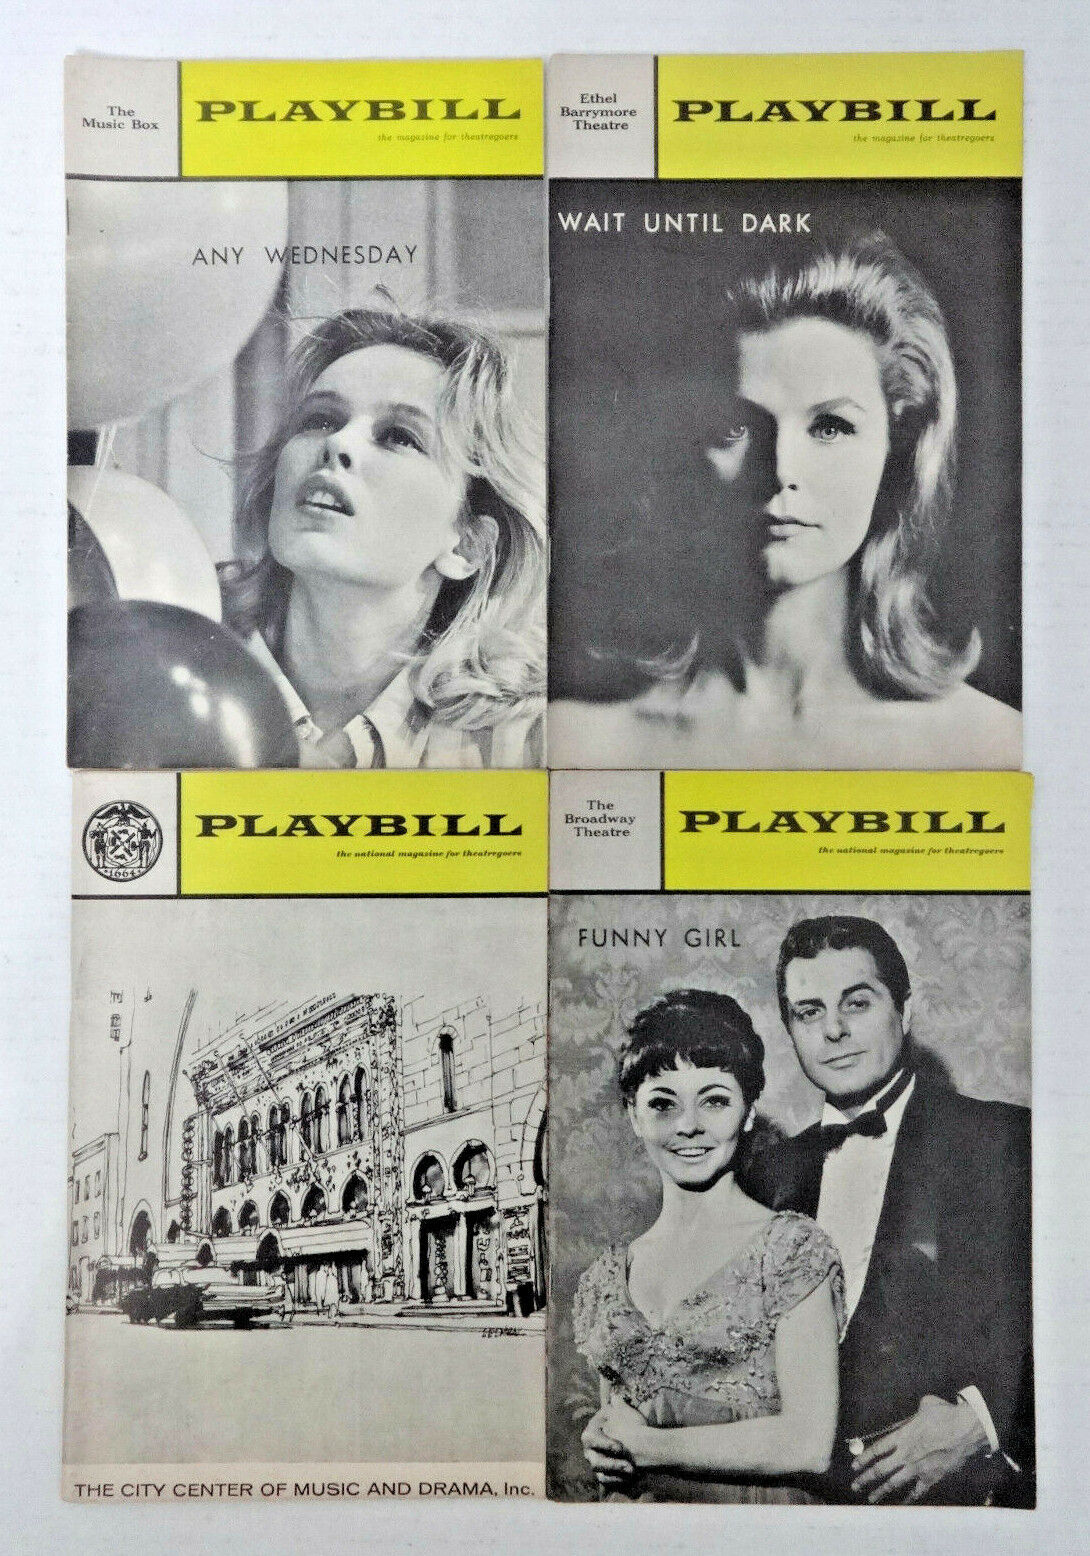 Playbill 64-67' OFFicial shop Any Wednesday Ranking TOP7 signed Until Dark Wait City Ce